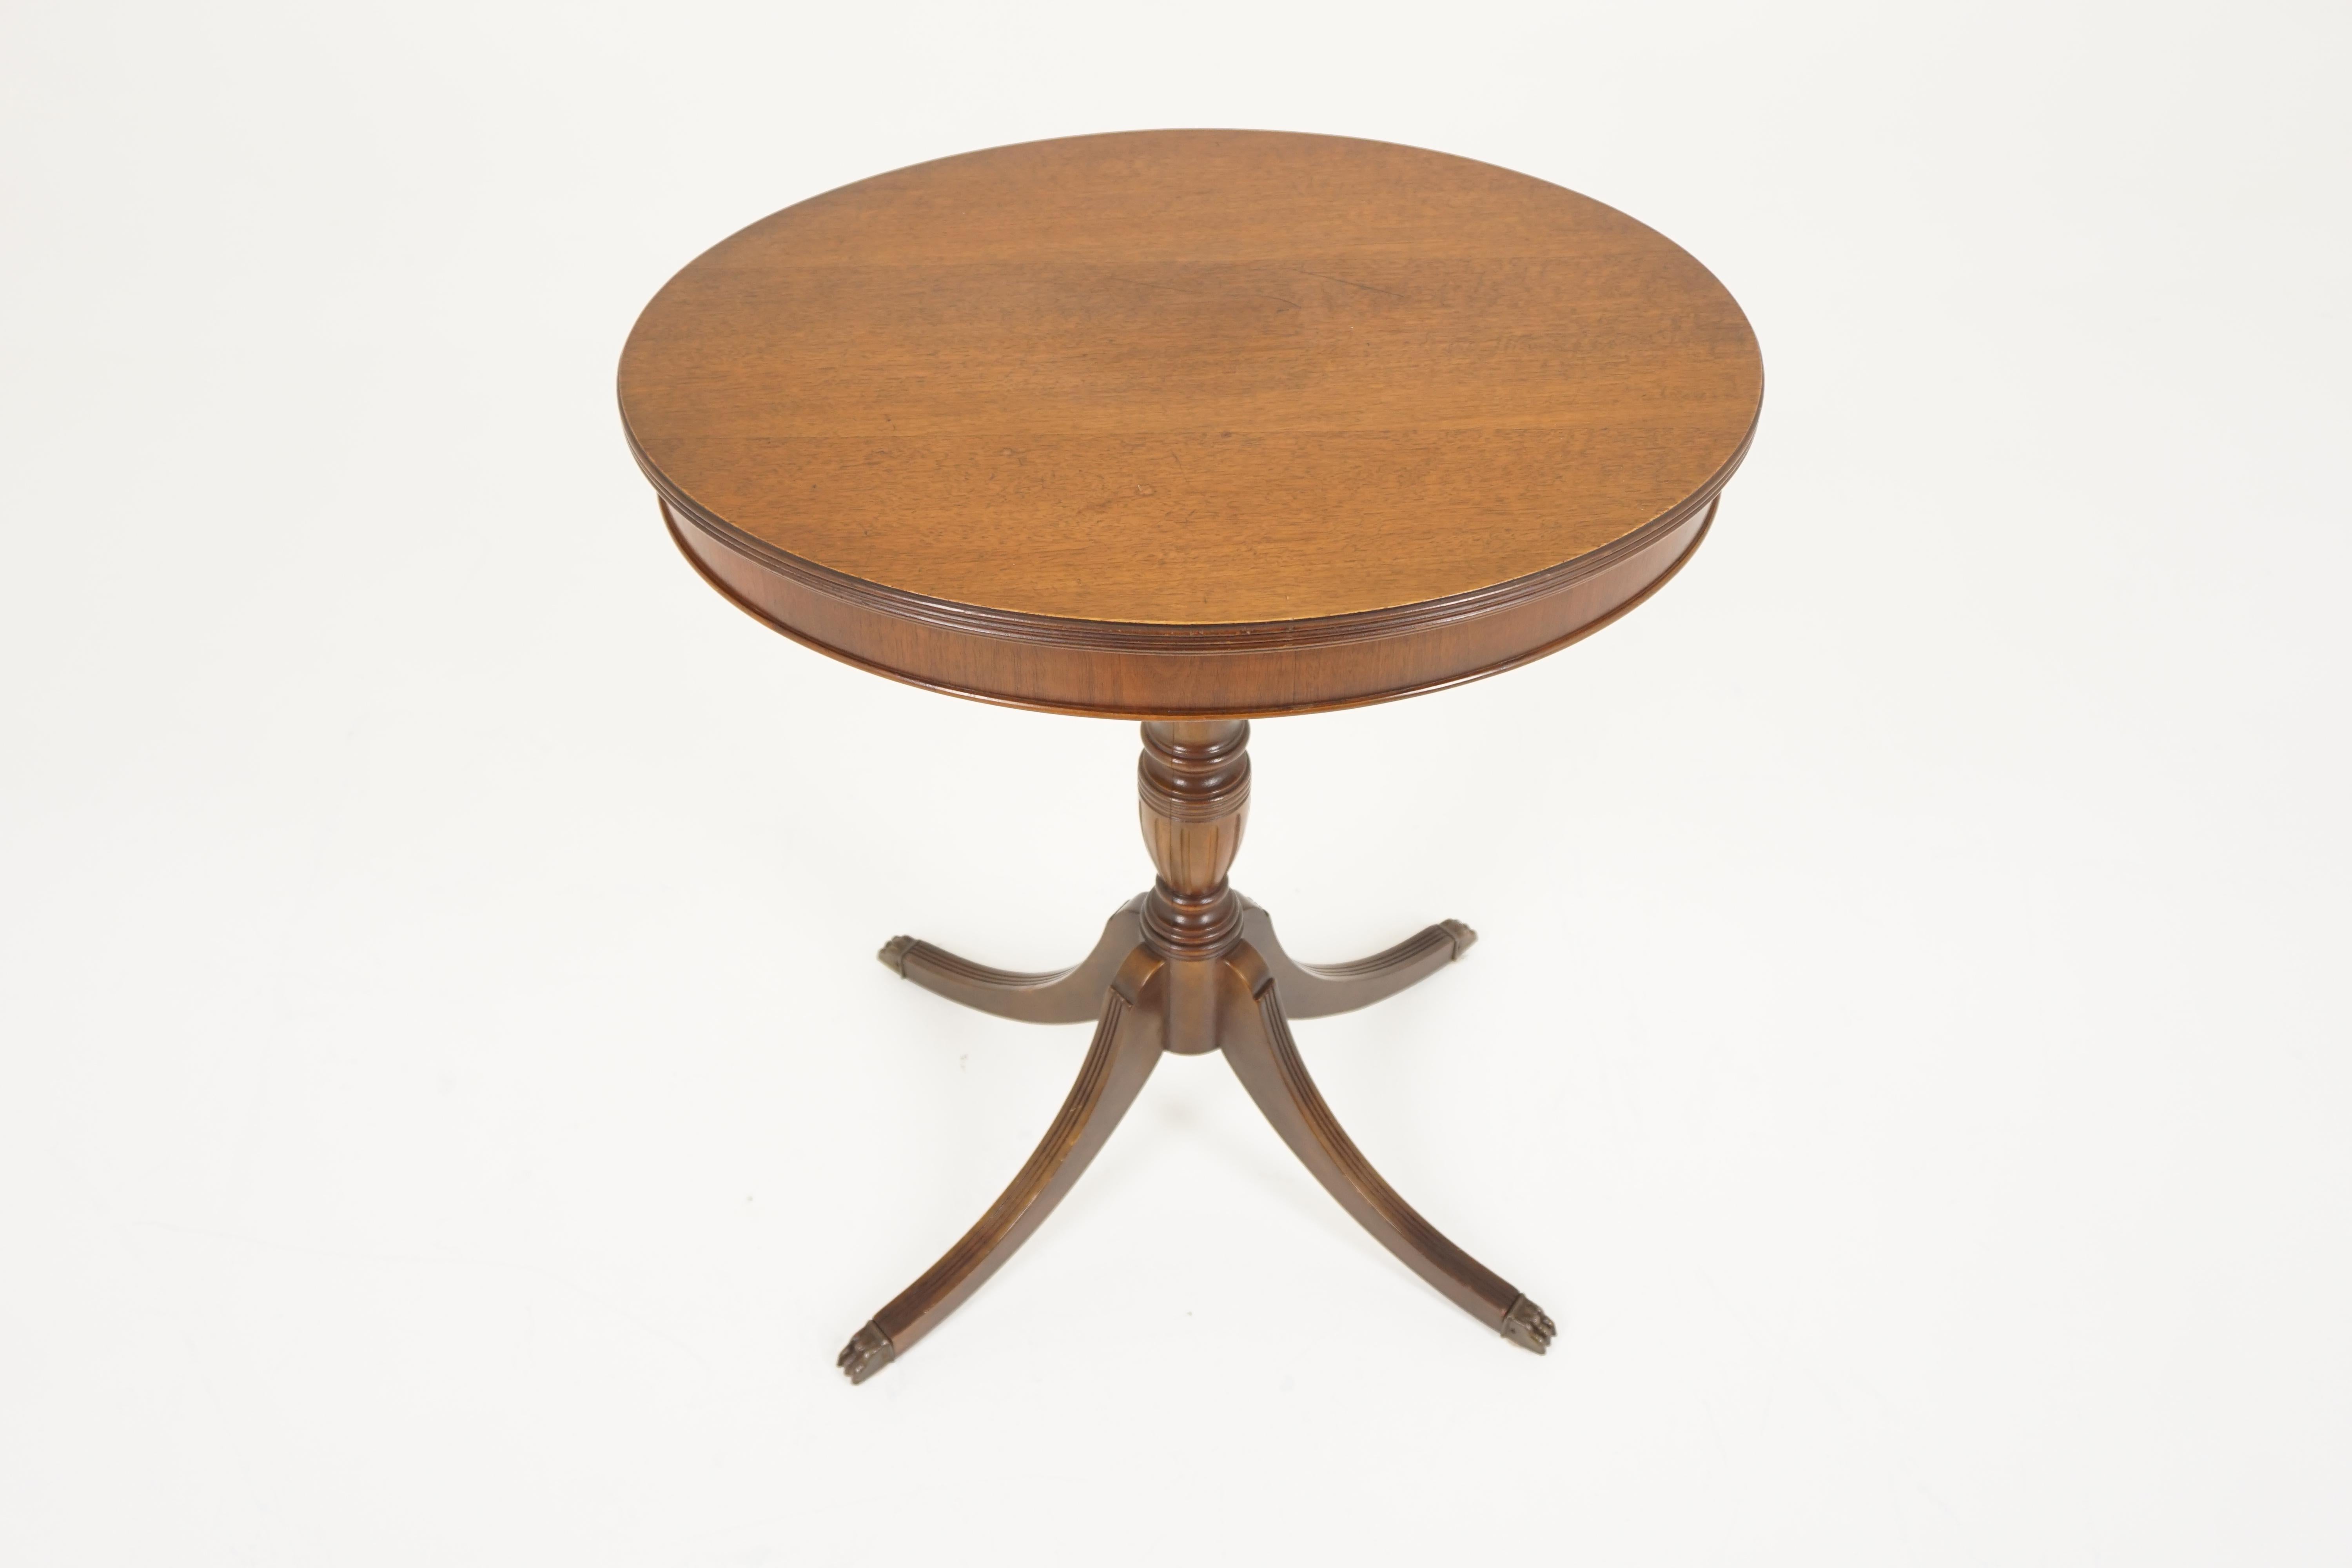 Vintage oval walnut table, Duncan Phyfe, on tripod base, America, 1930s

America, 1930s
Solid walnut
Original finish
Oval top
Standing on a turned pedestal with four swept out, reeded legs with brass caps on the bottom
Nice solid
Good